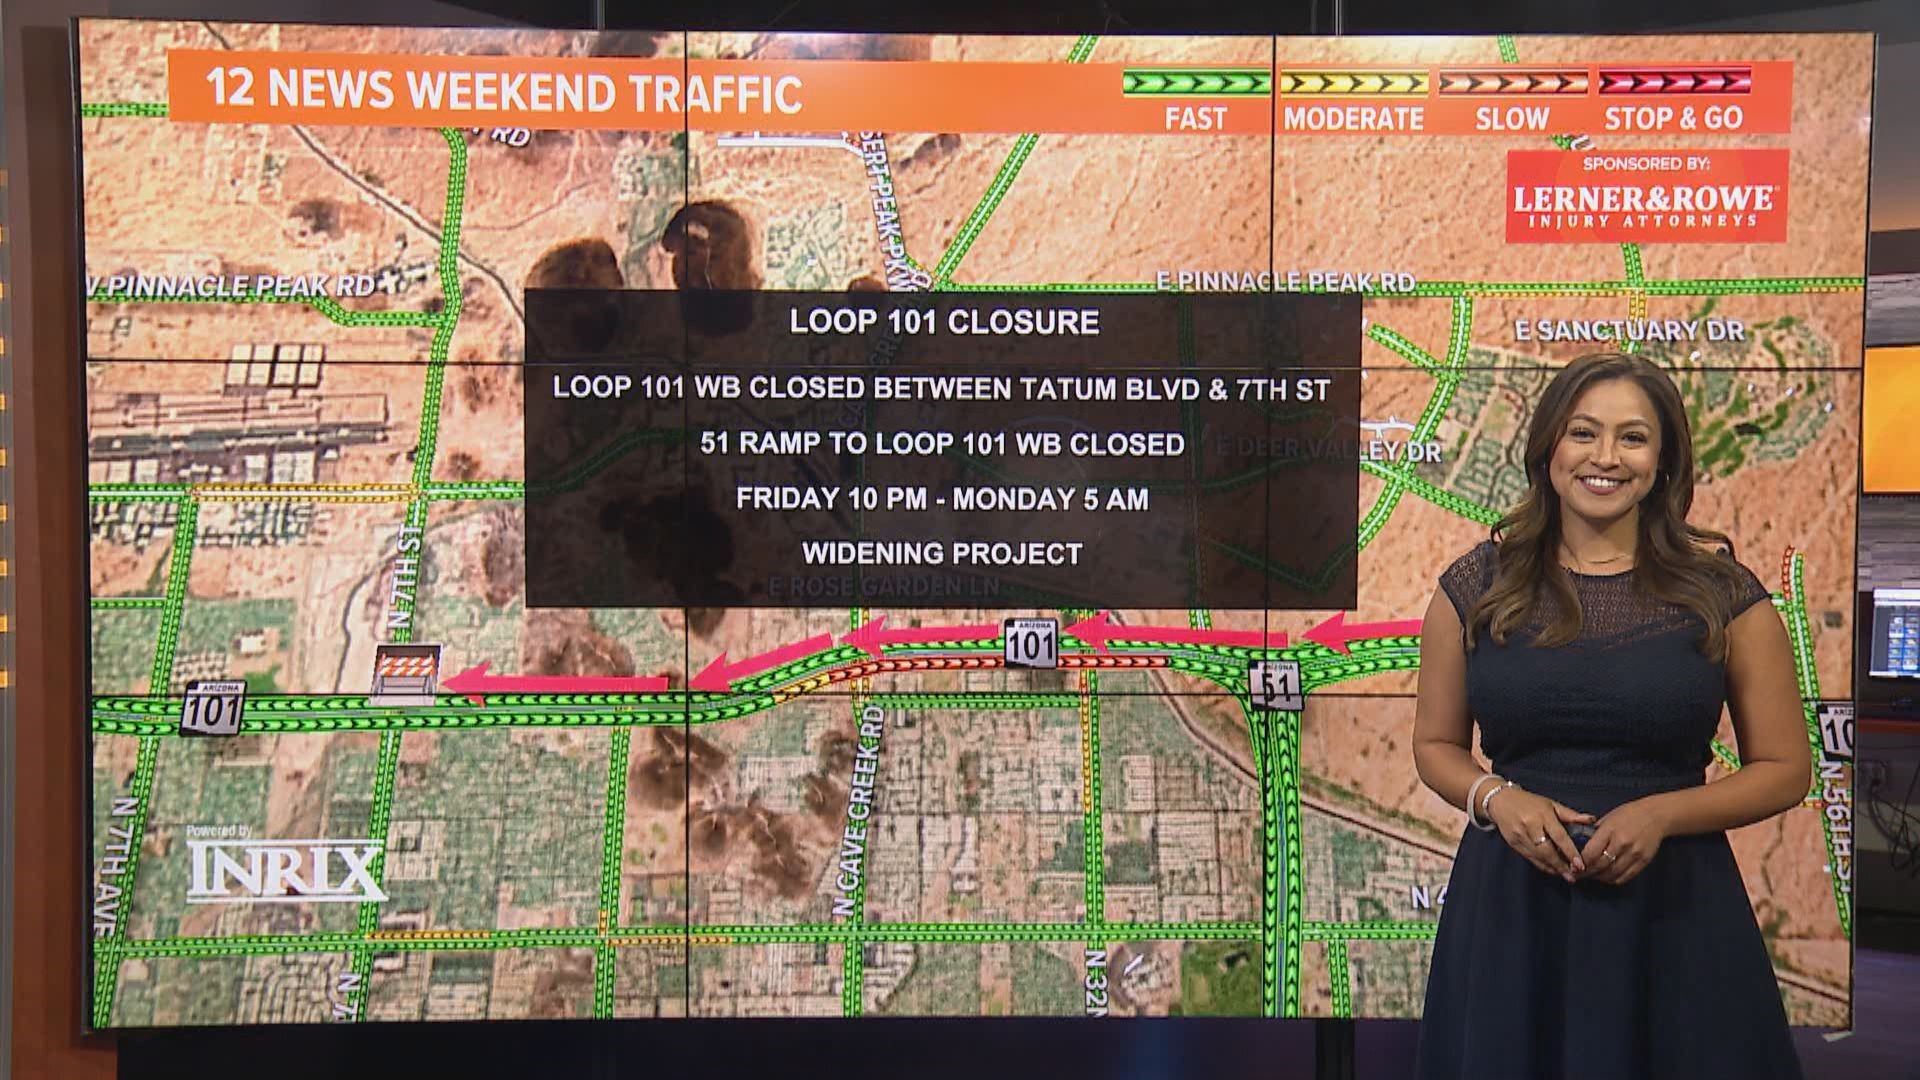 Get the latest information on closures and detours on Valley roads from Team 12's Vanessa Ramirez.